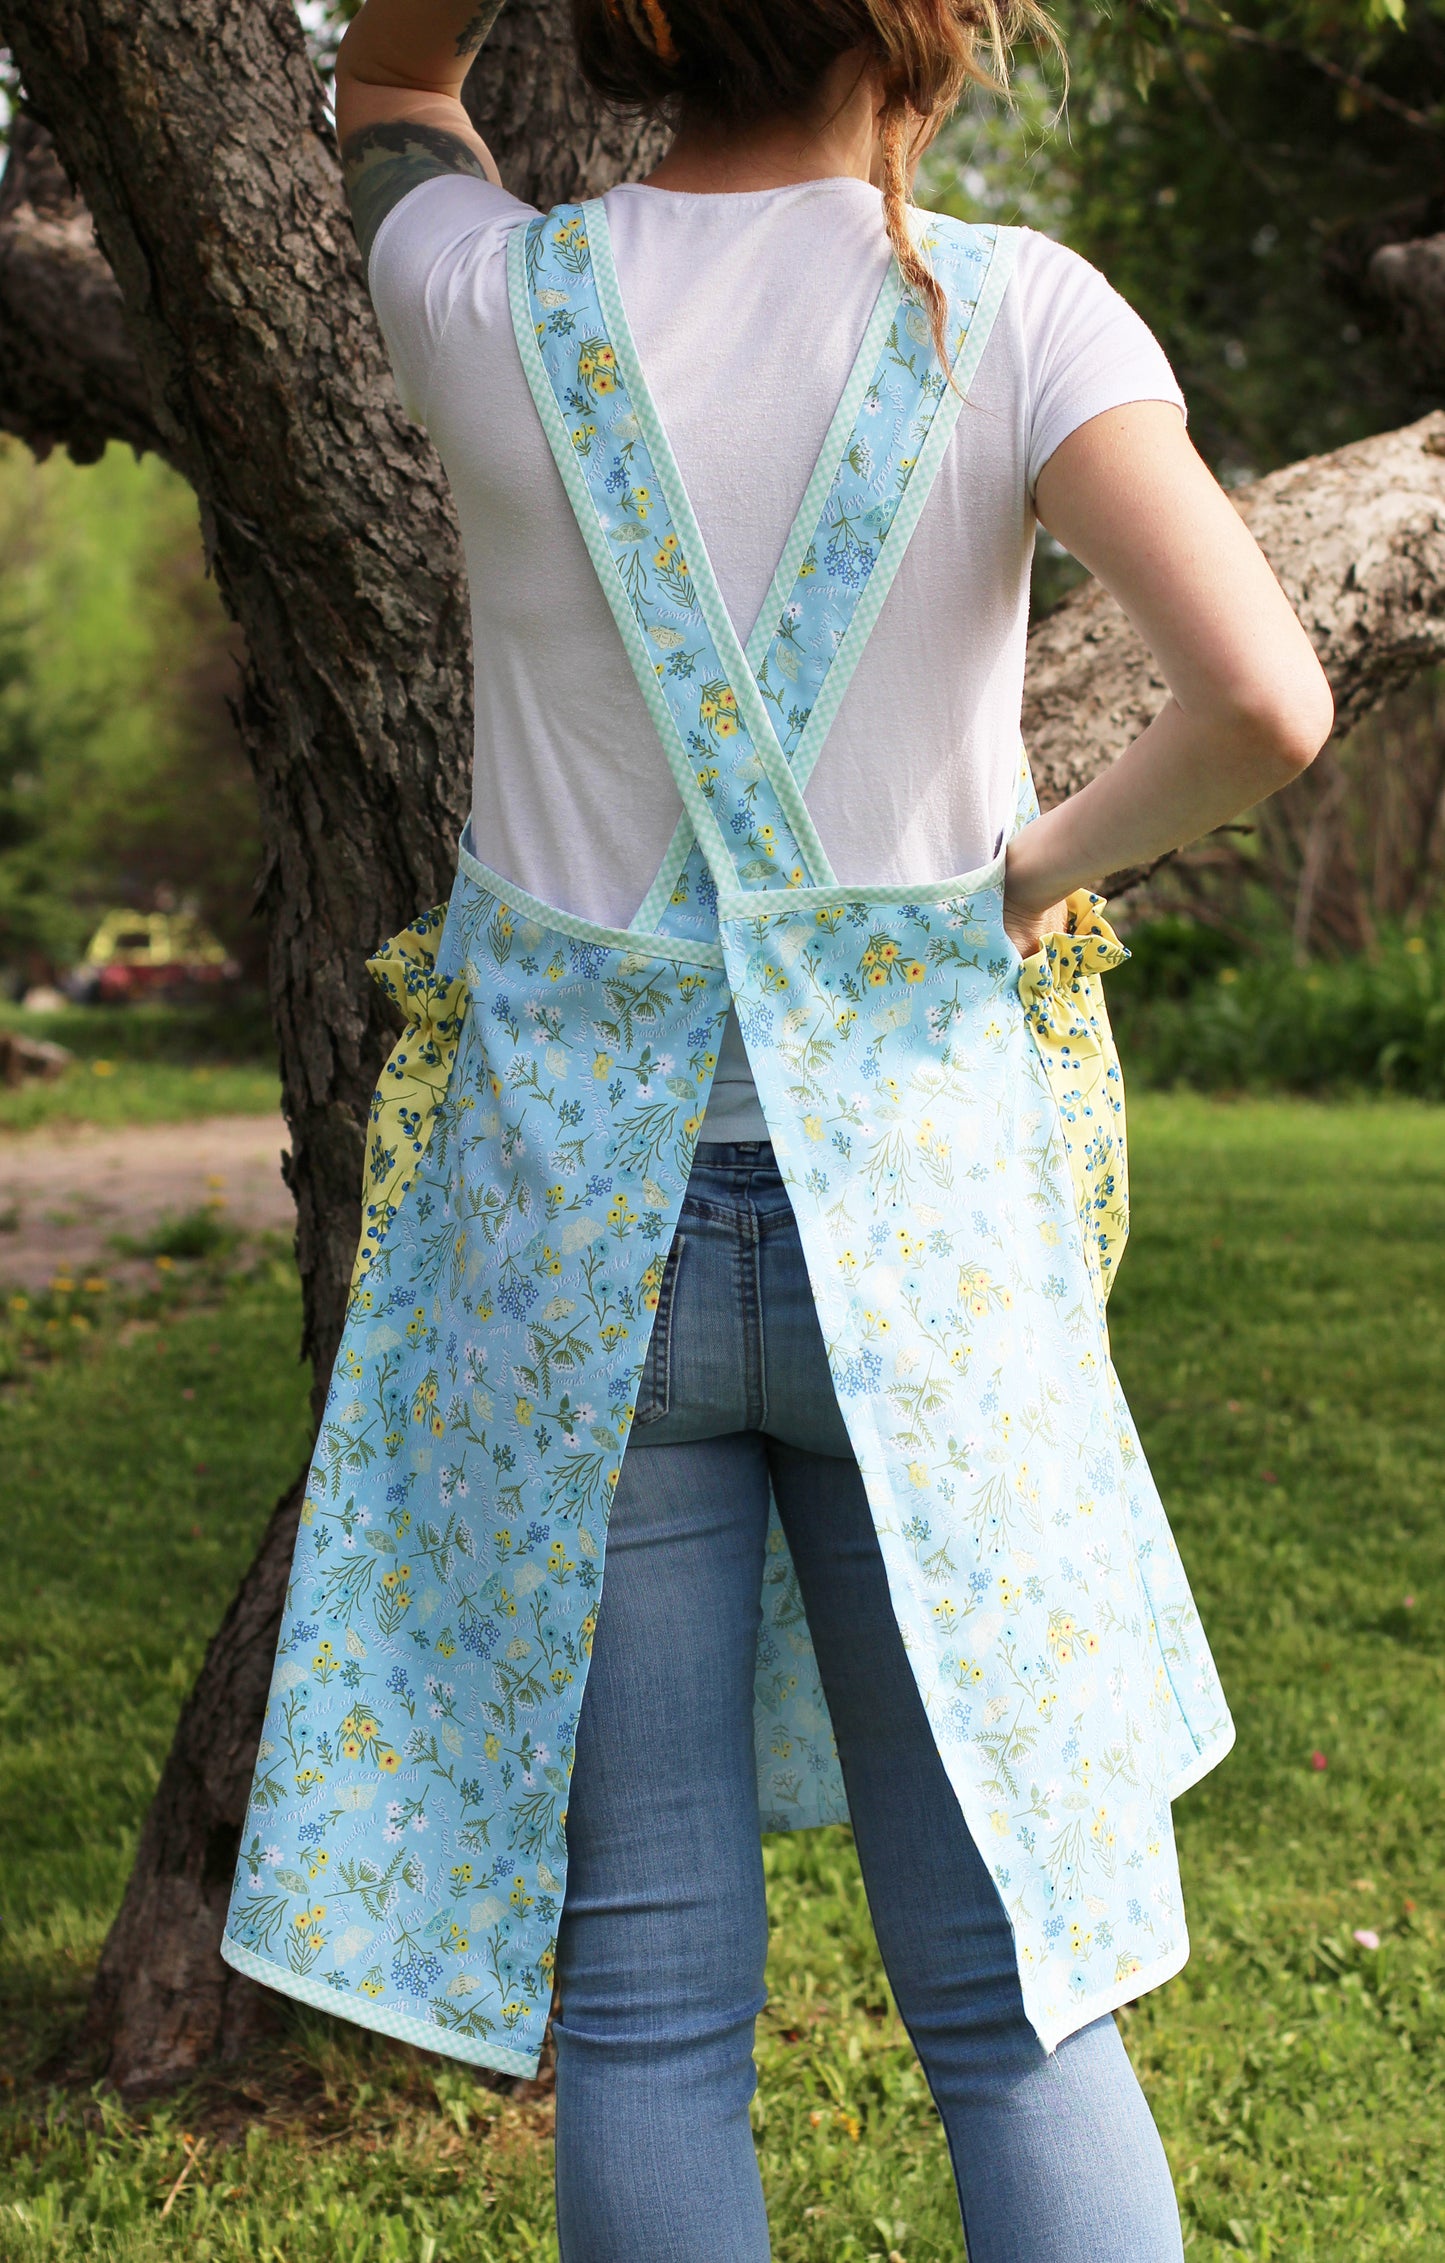 No Tie Apron in Blue Floral with Yellow Pockets - Back View